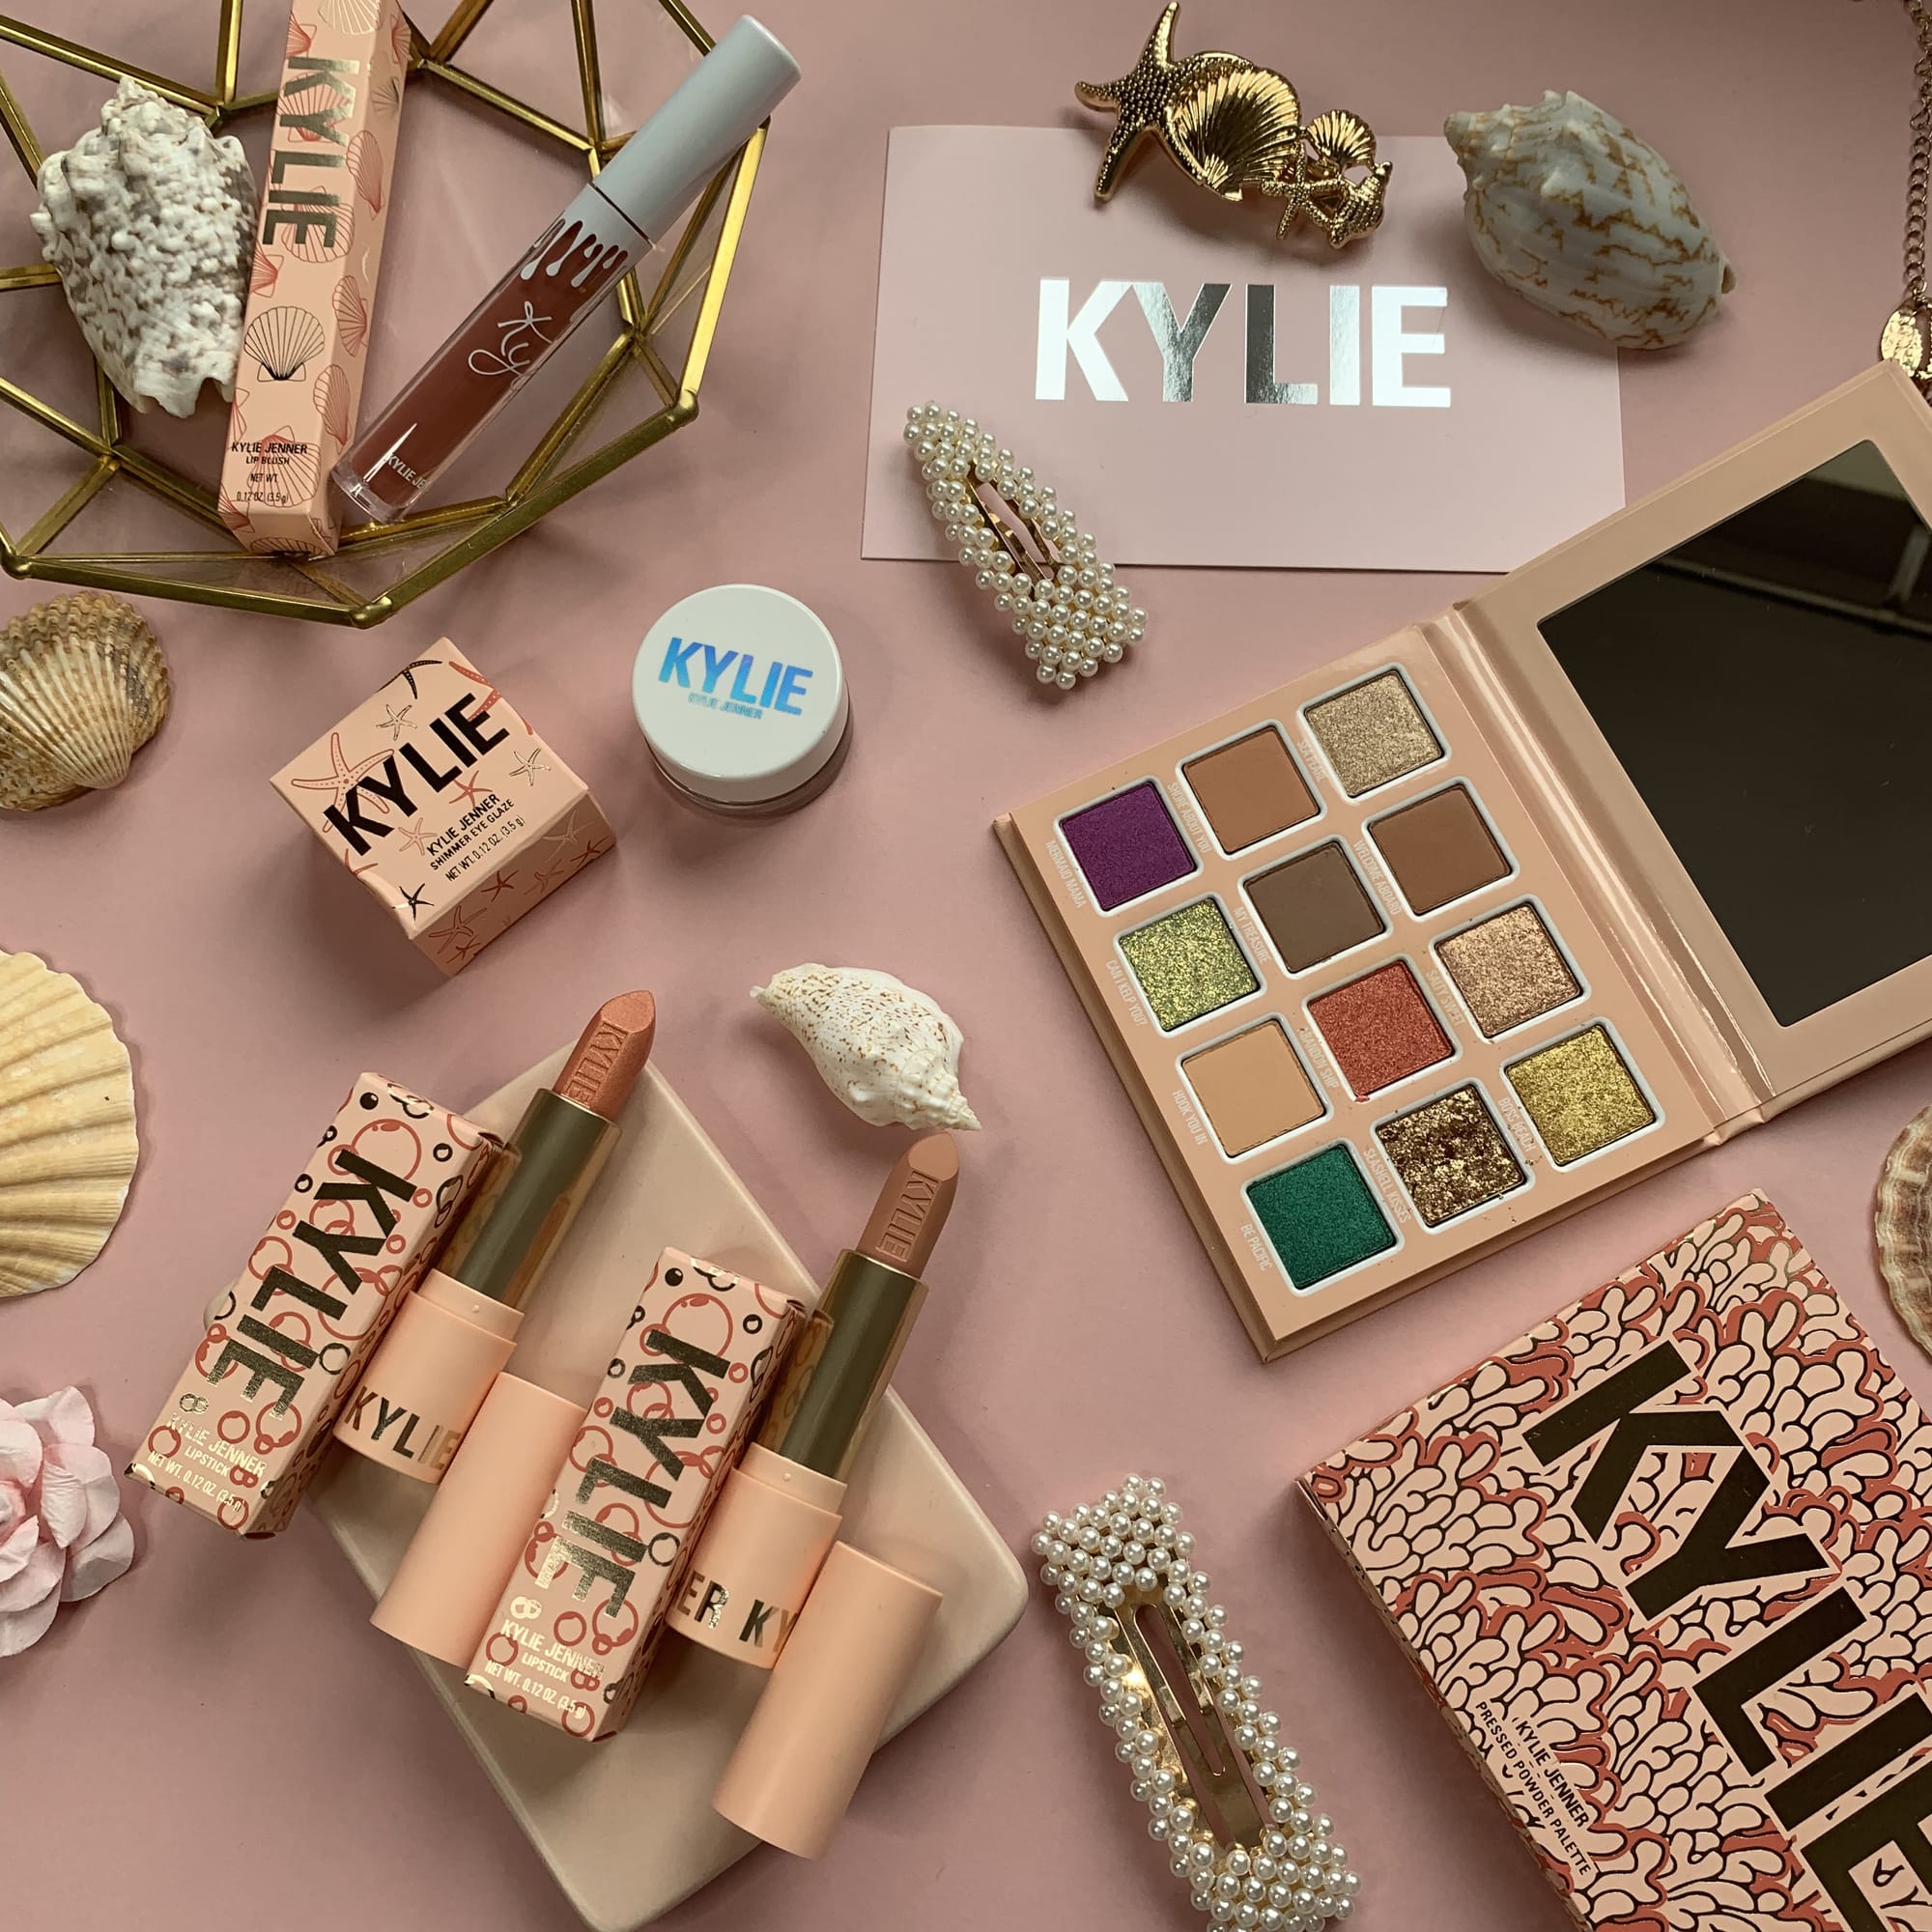 Kylie Cosmetics Under The Sea Summer Collection 2019 - Miss Boux